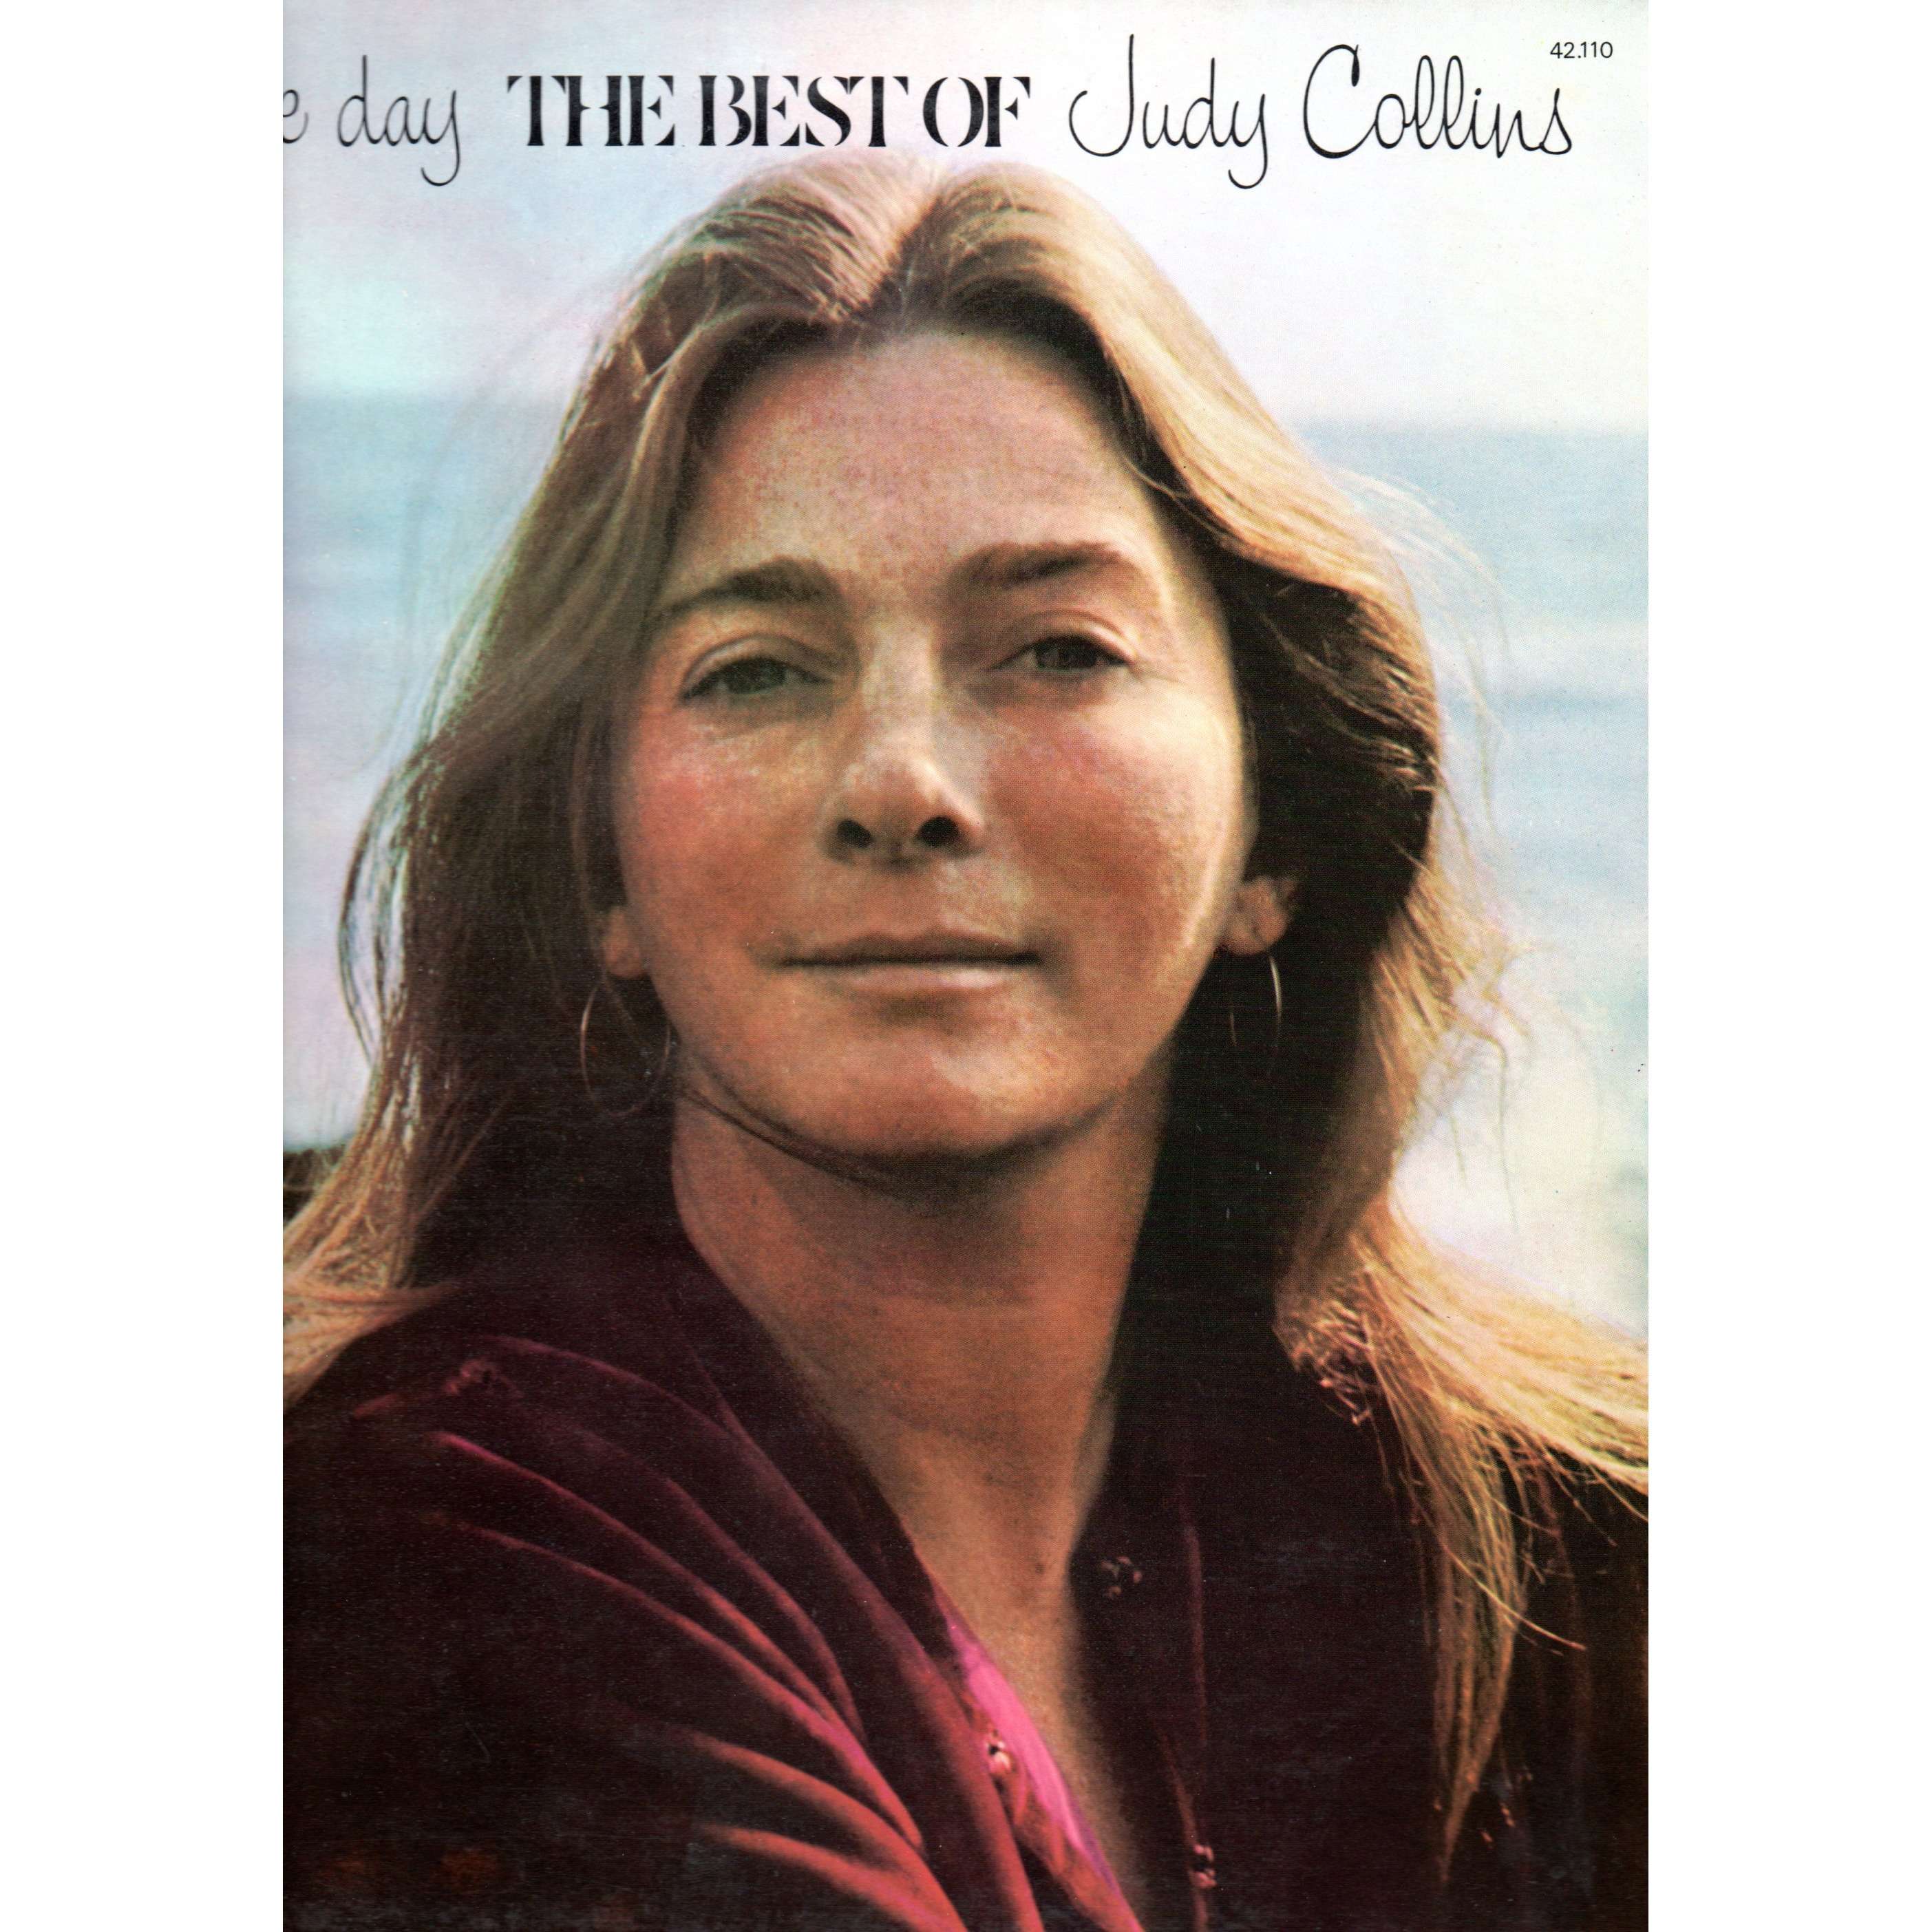 album Judy covers collins